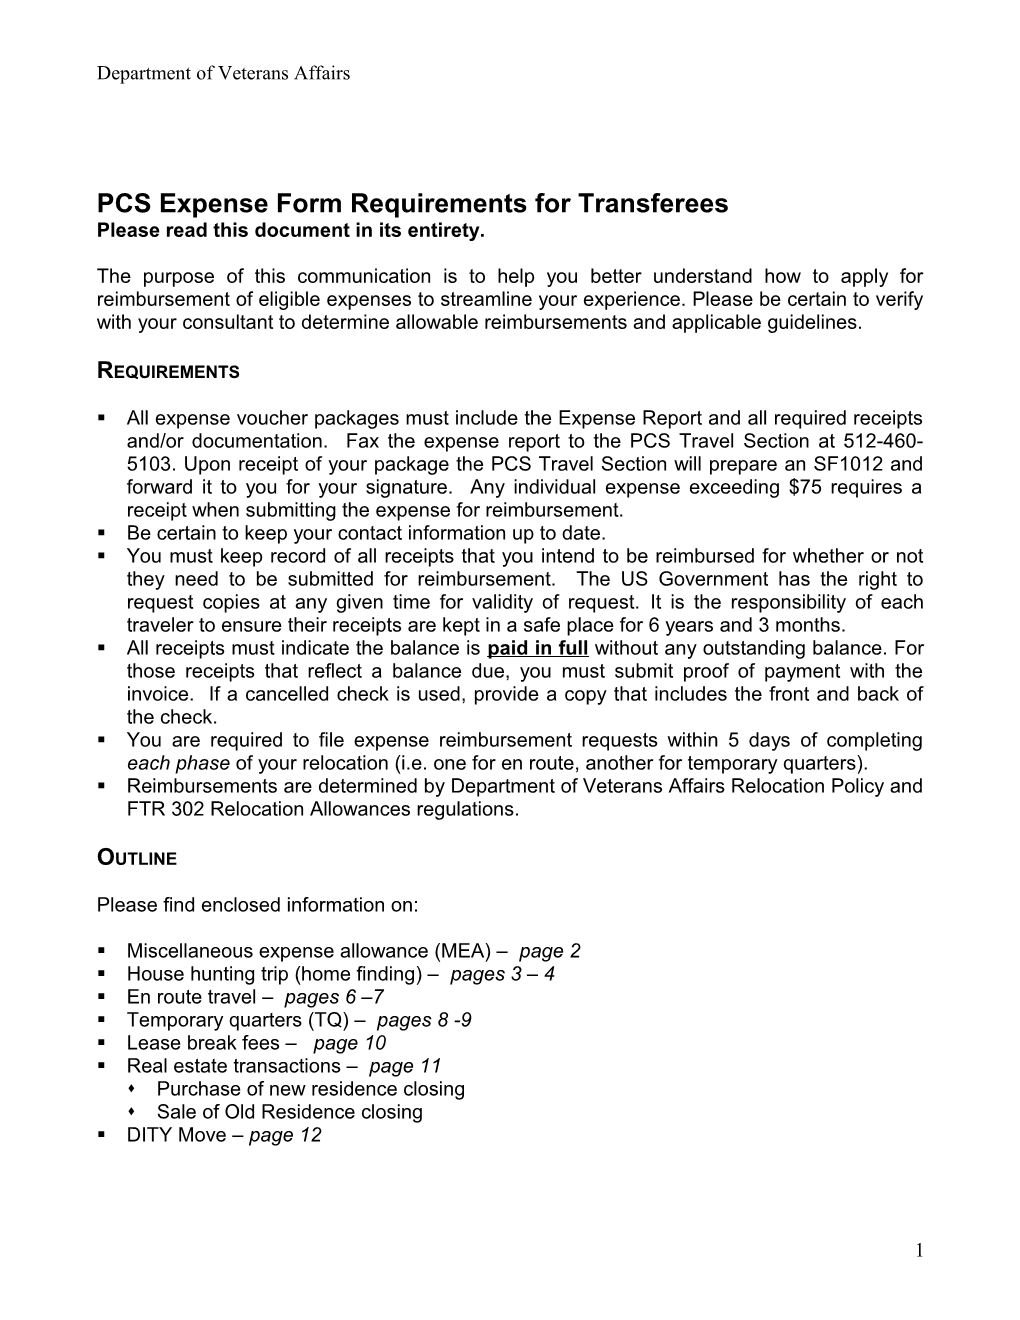 PCS Expense Form Requirements for Transferees